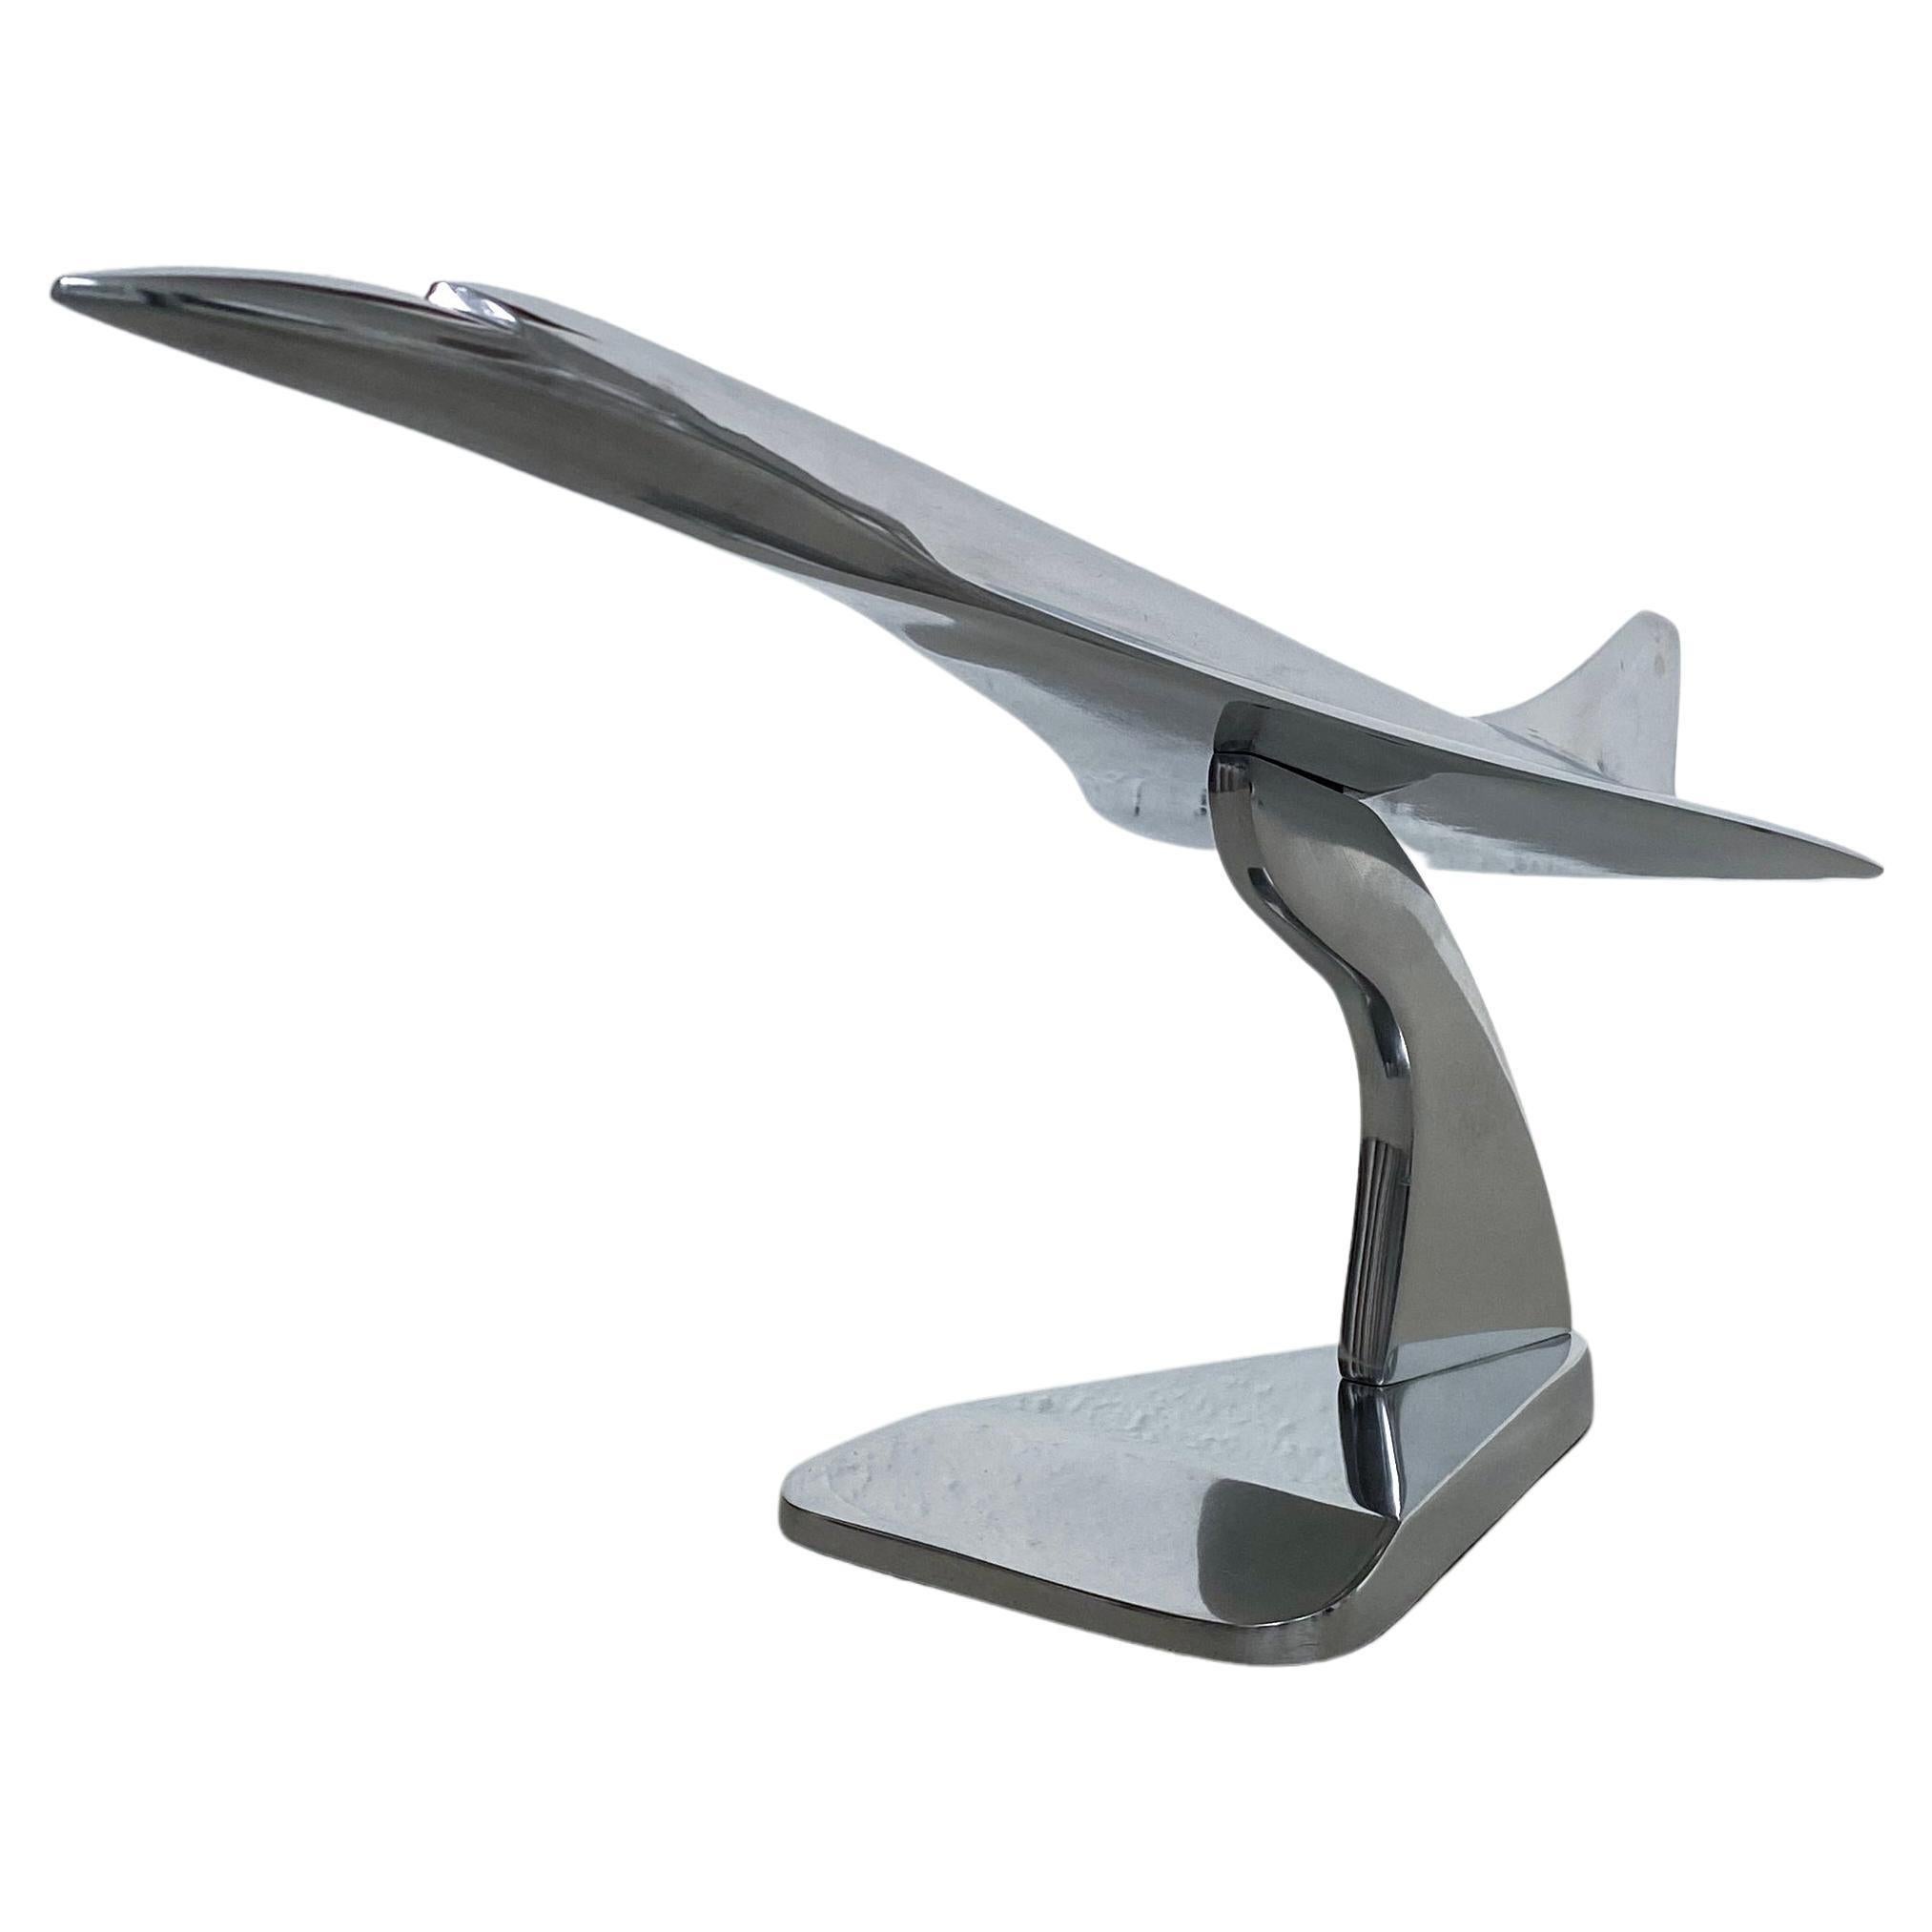 Concorde Supersonic Plane Display Mounted Sculpture in Polished Stainless Steel For Sale